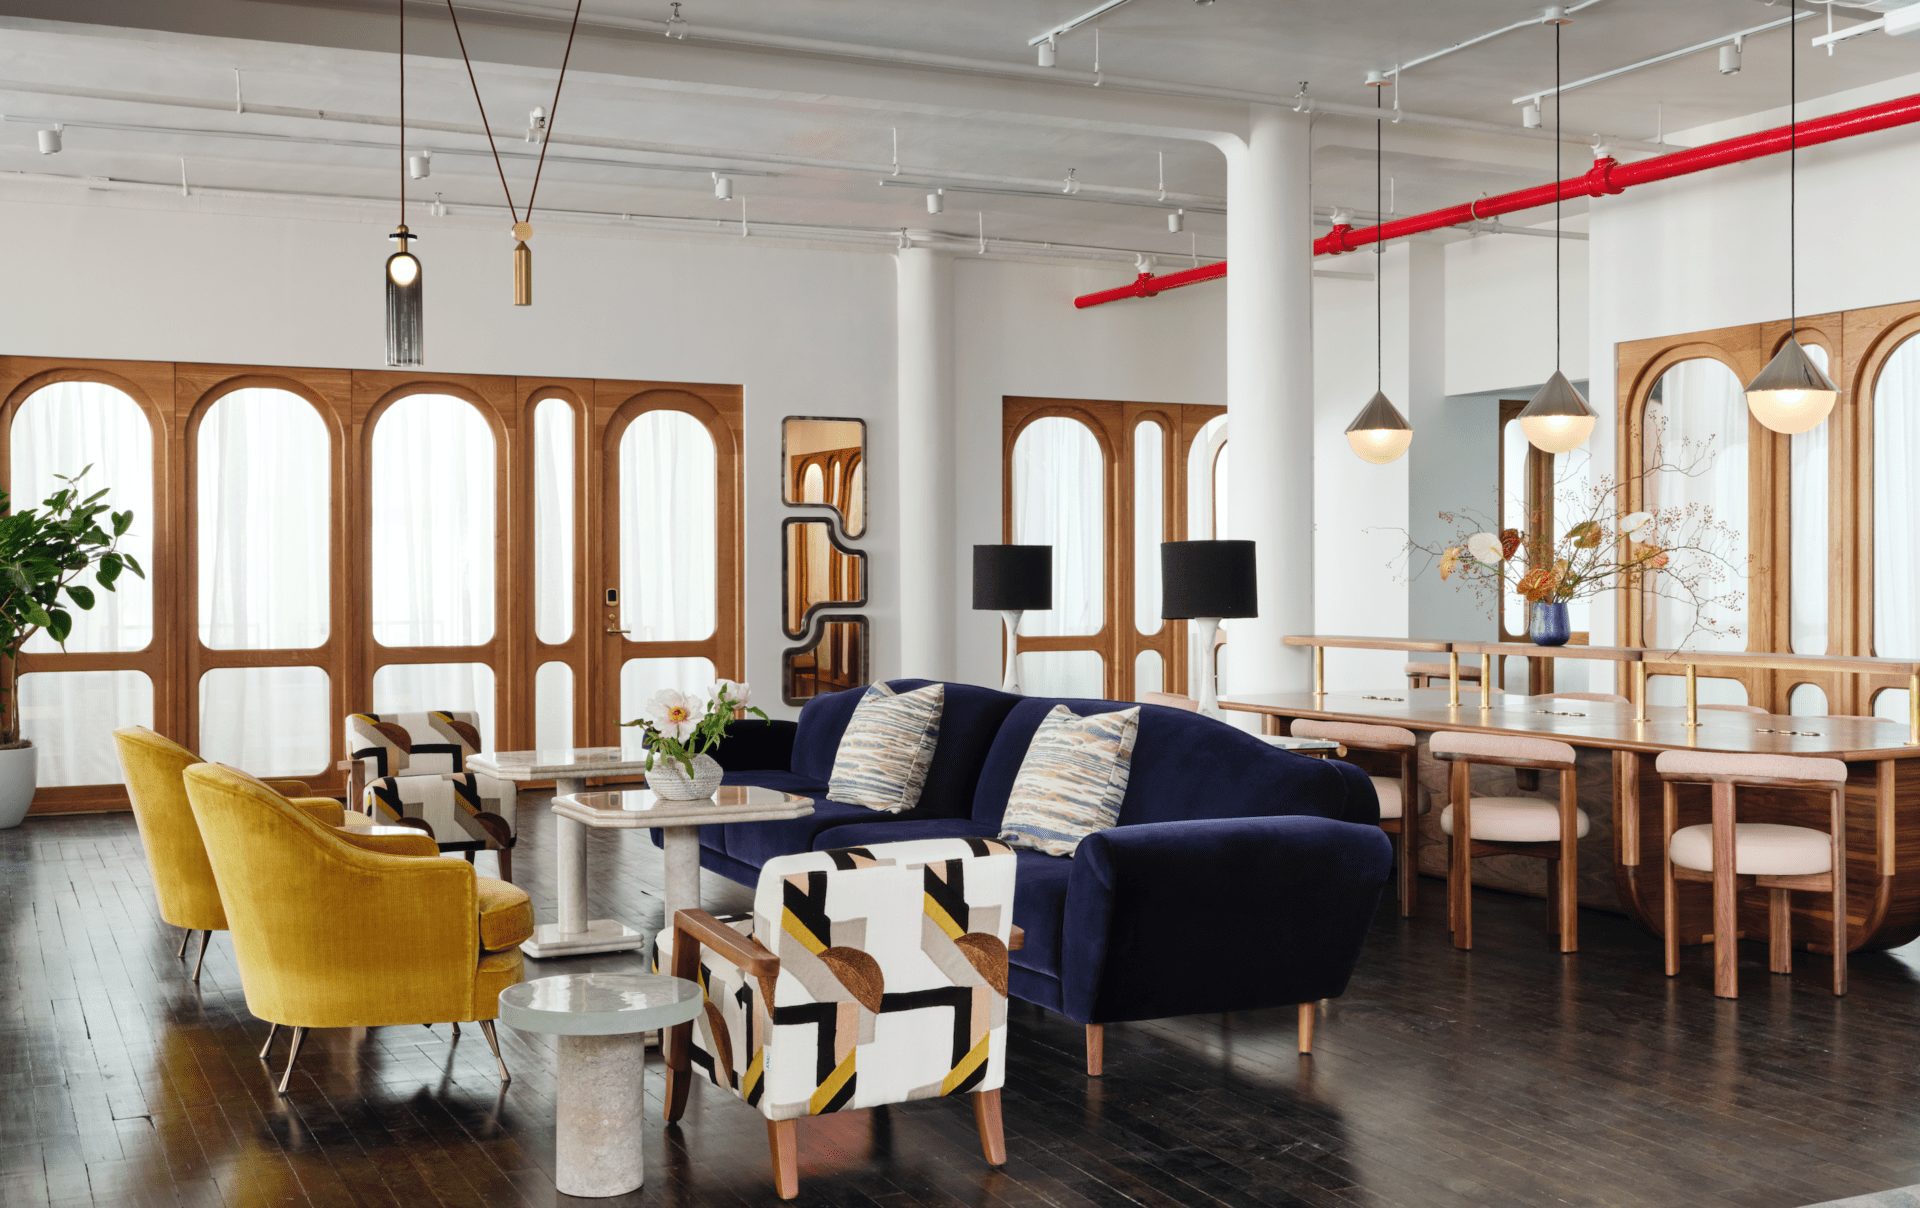 Boutique coworking space The Malin opens in New York's upscale SoHo neighbourhood